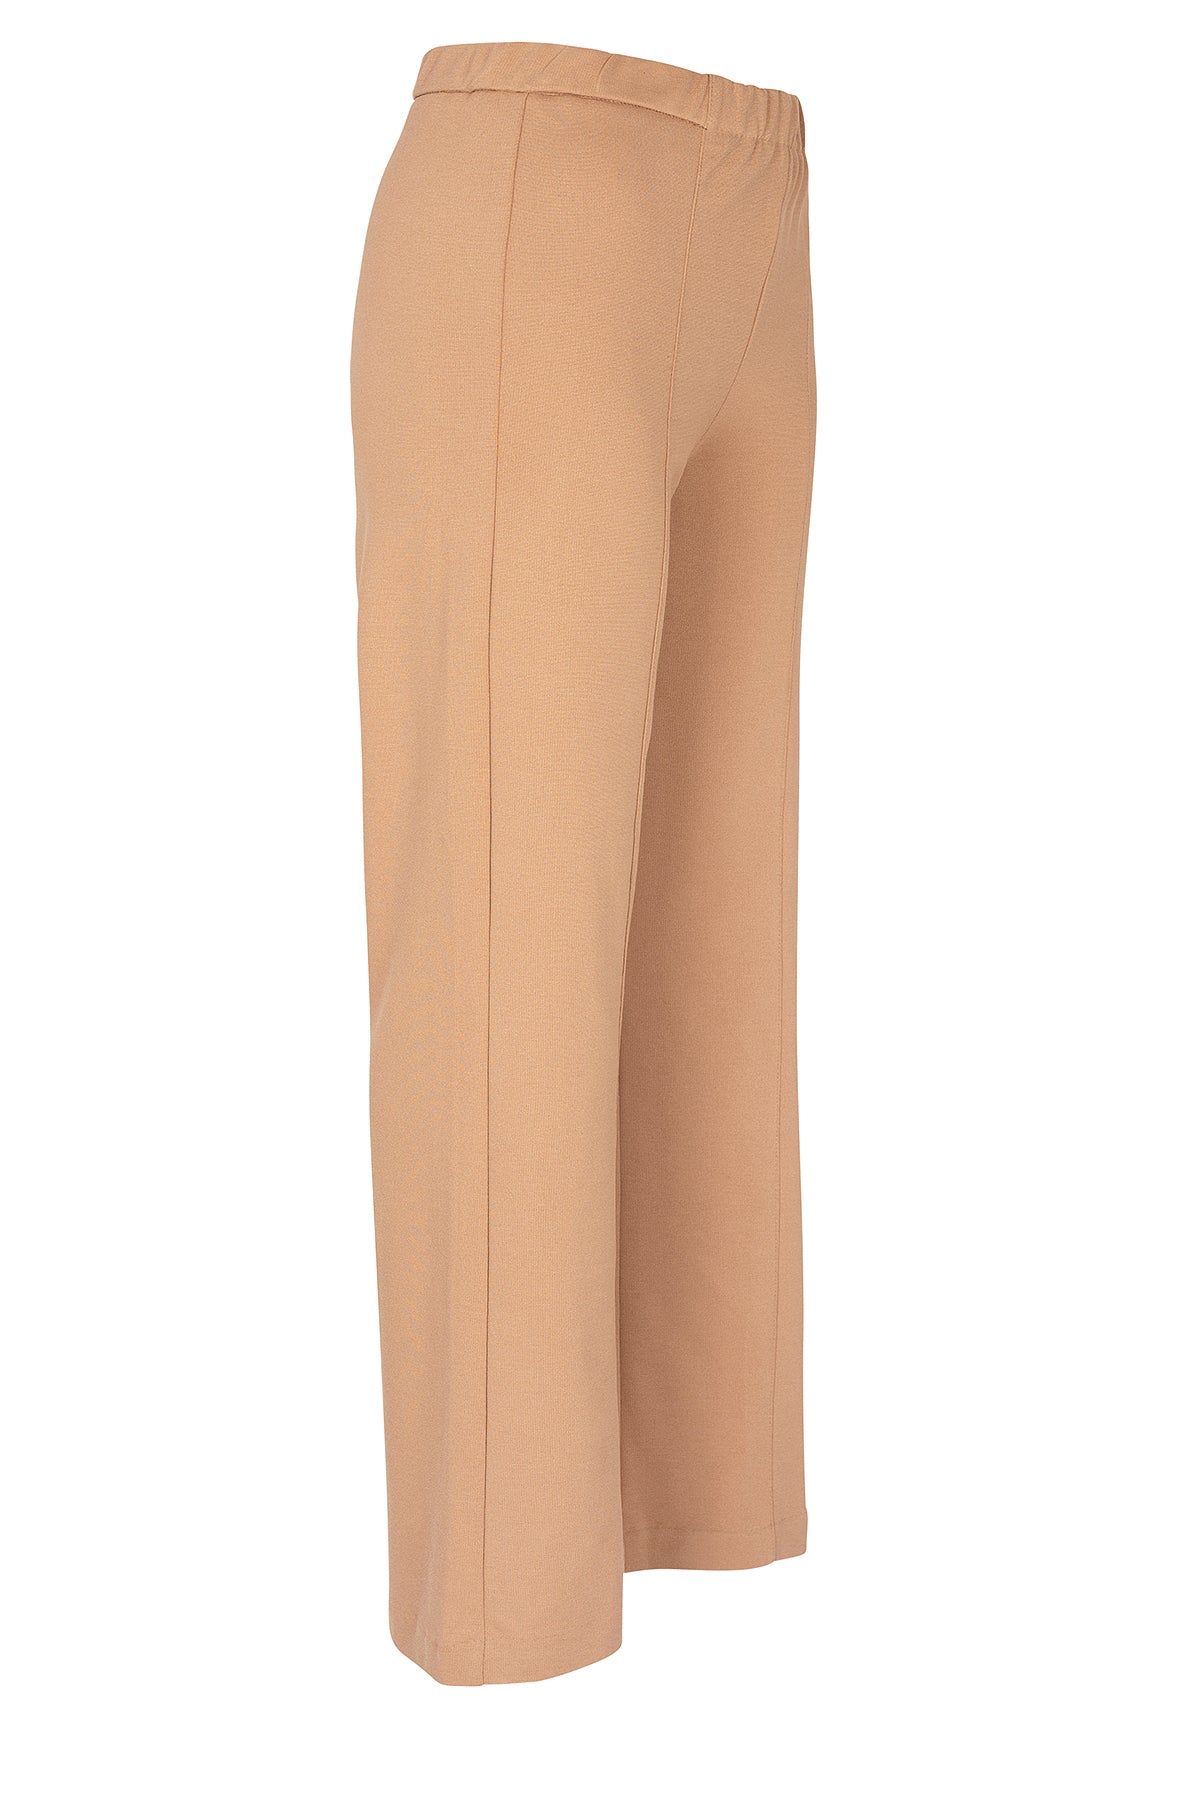 LUXZUZ // ONE TWO Beate Pant Pant 703 Camel